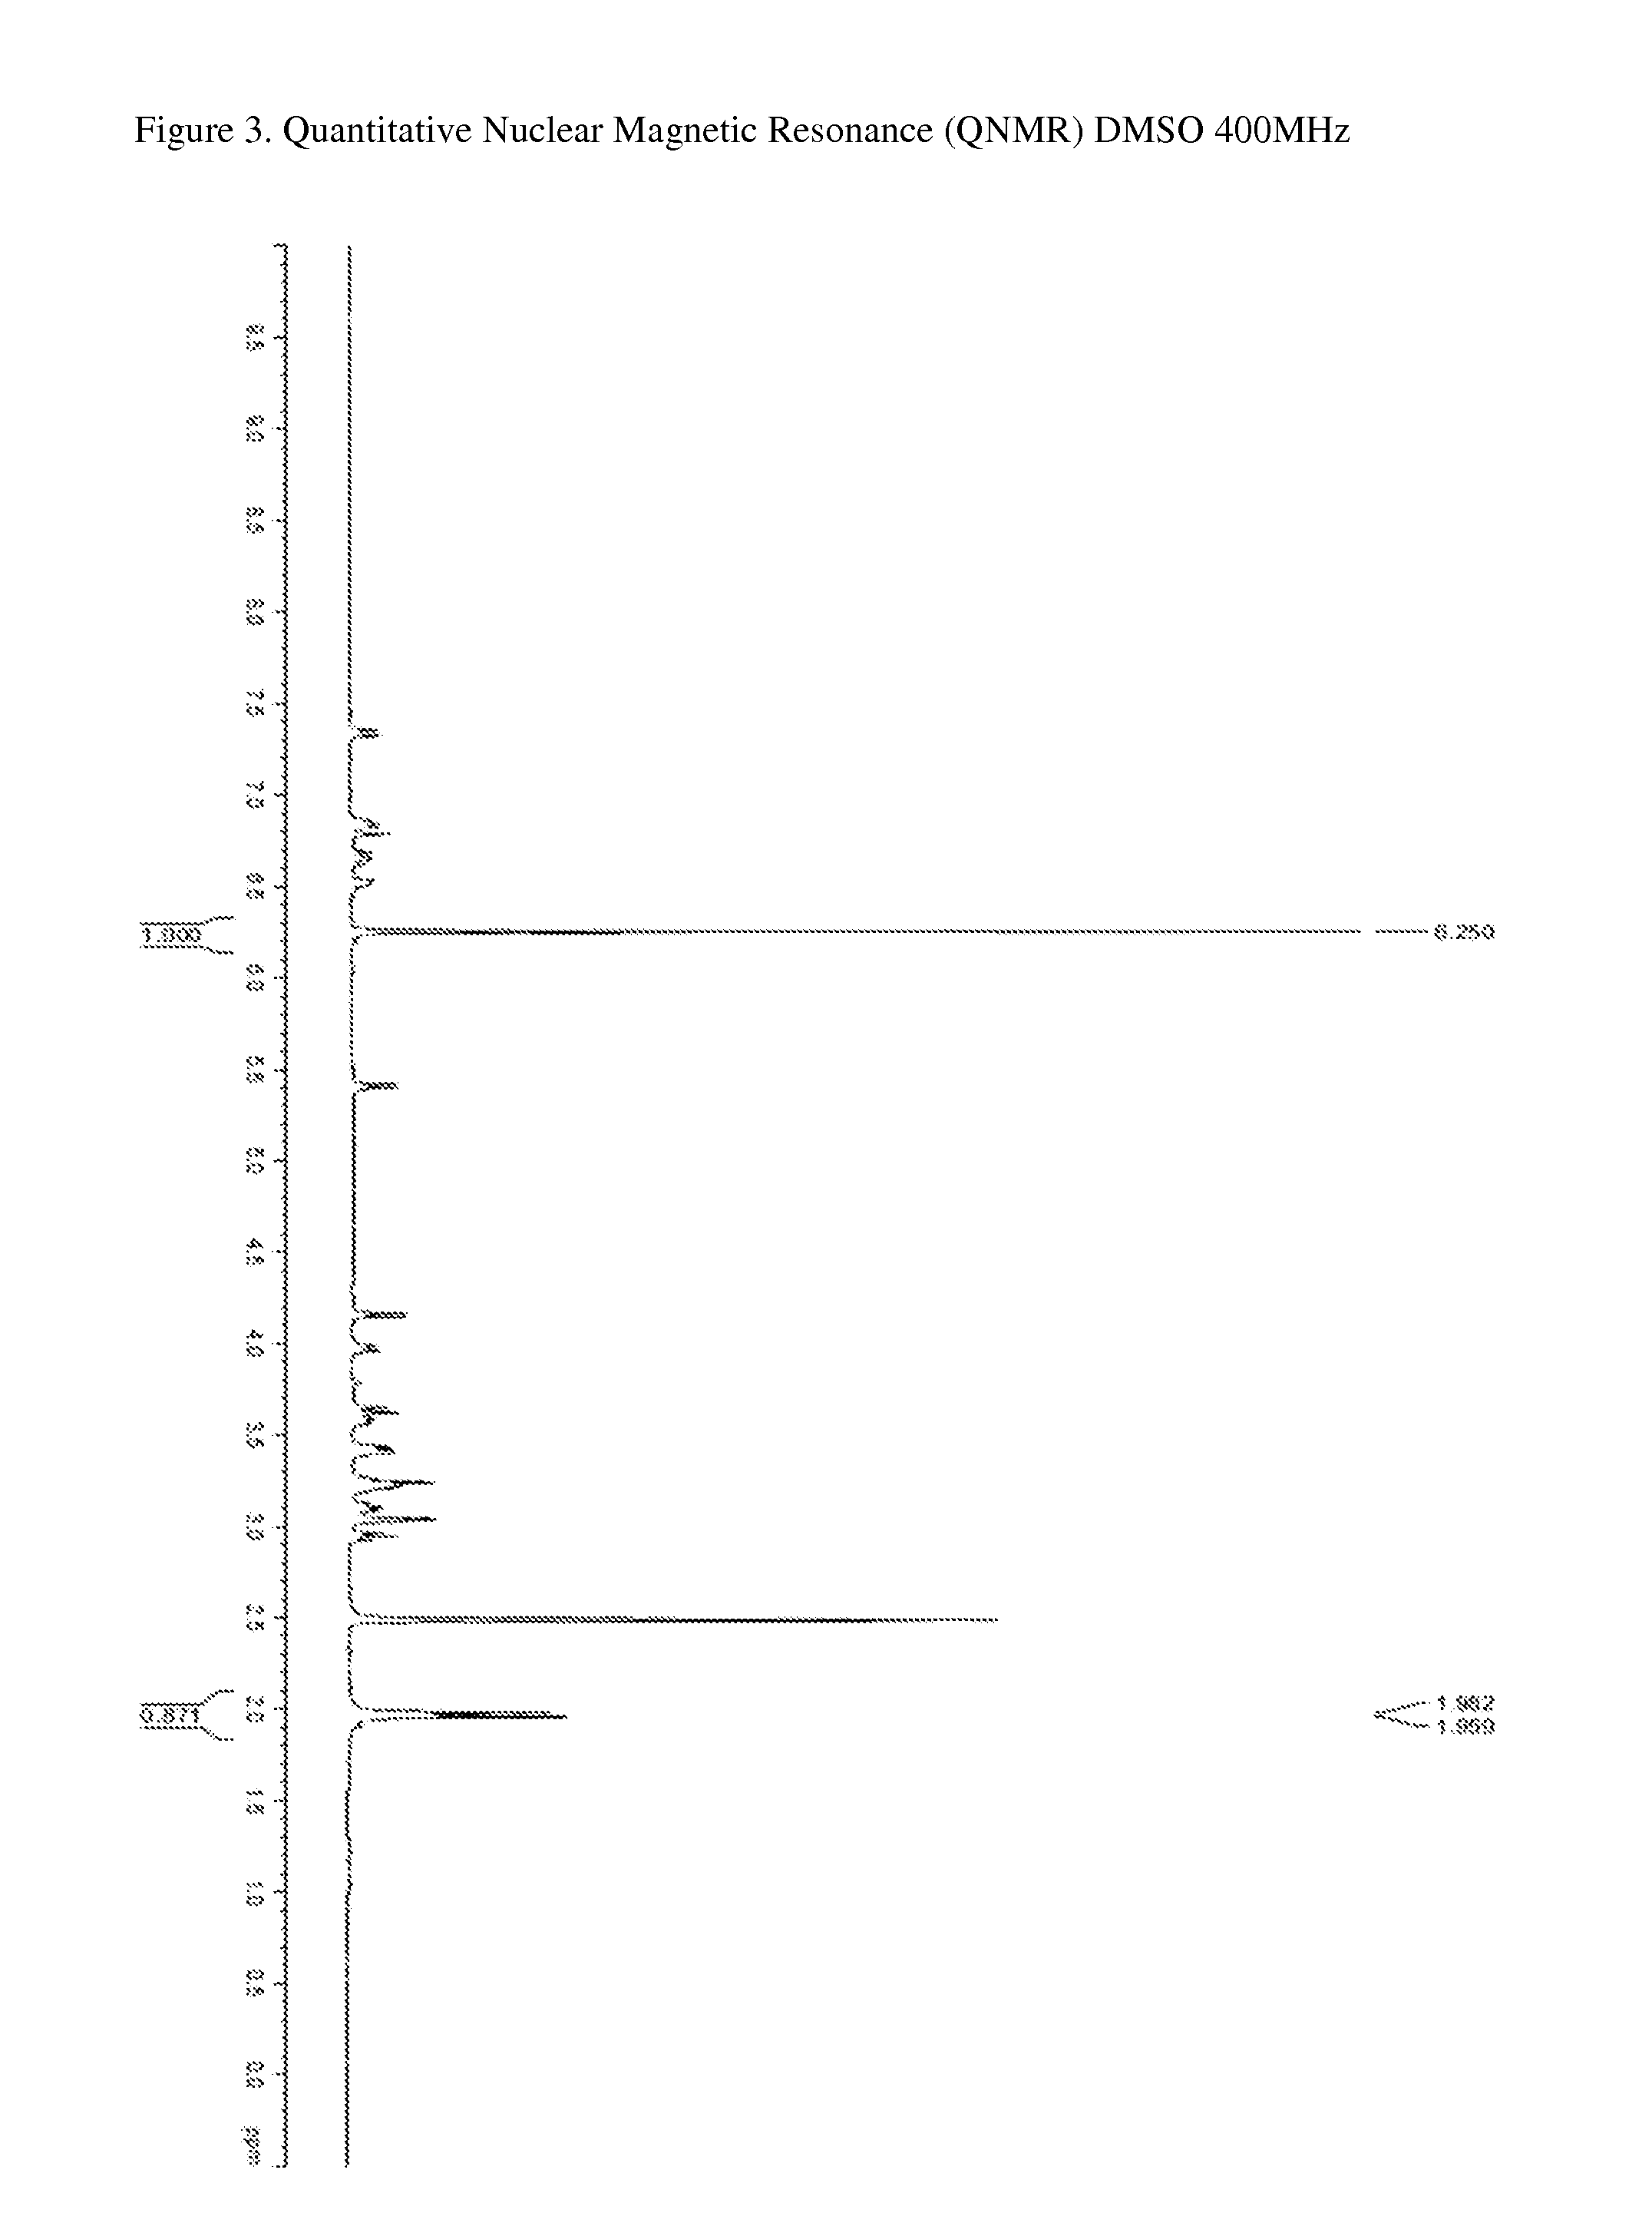 Compositions containing enriched natural crocin and/or crocetin, and their therapeutic or nutraceutical uses